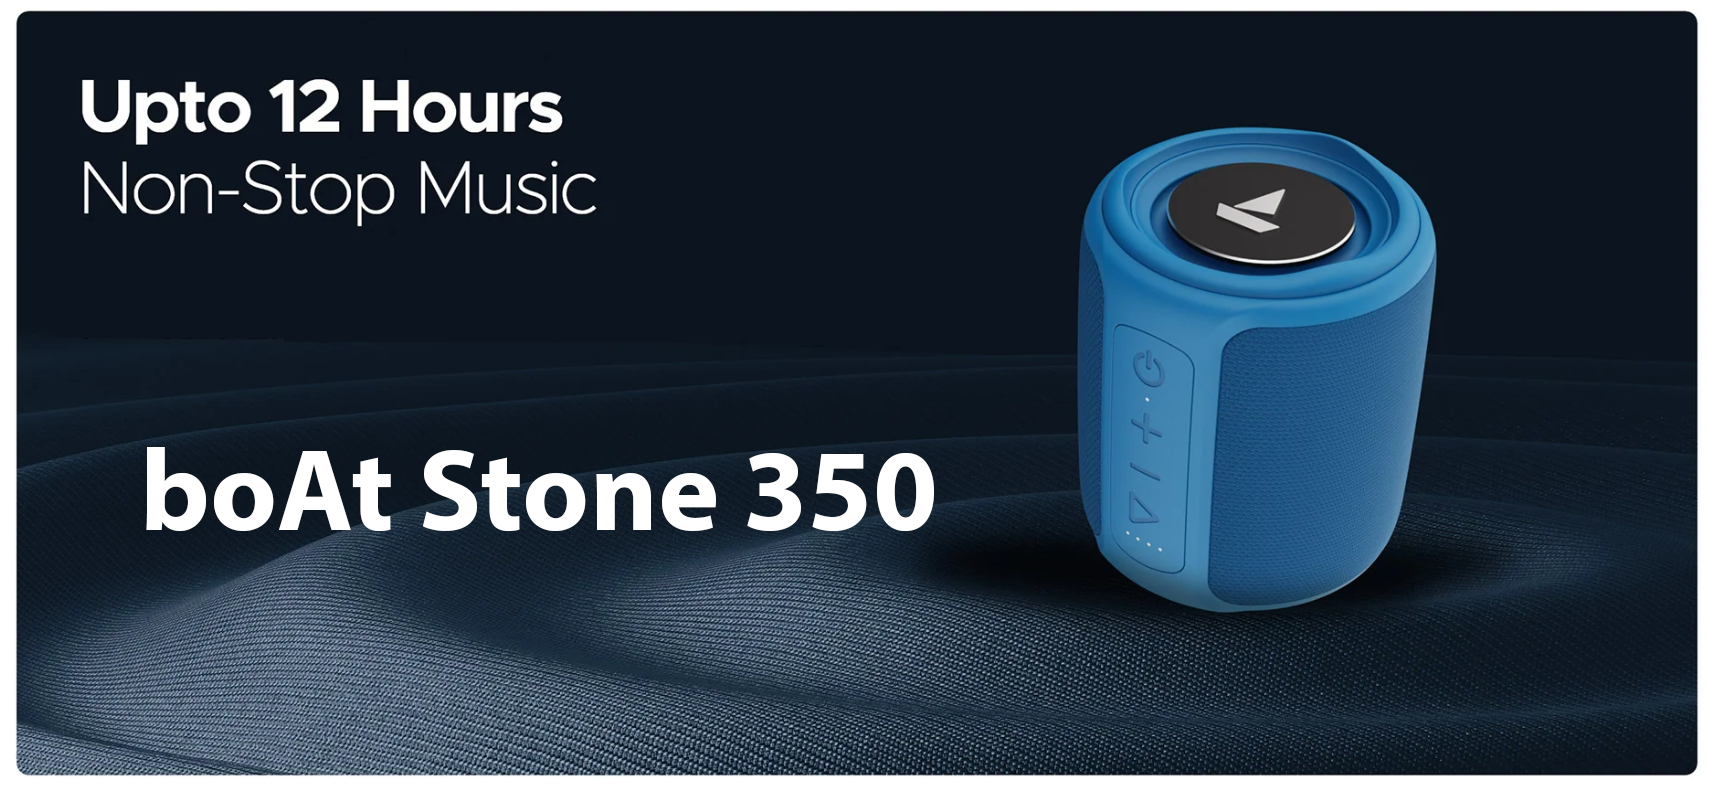 boAt Stone 350 Bluetooth Speaker with 12 Hours of Playtime Launched in Nepal